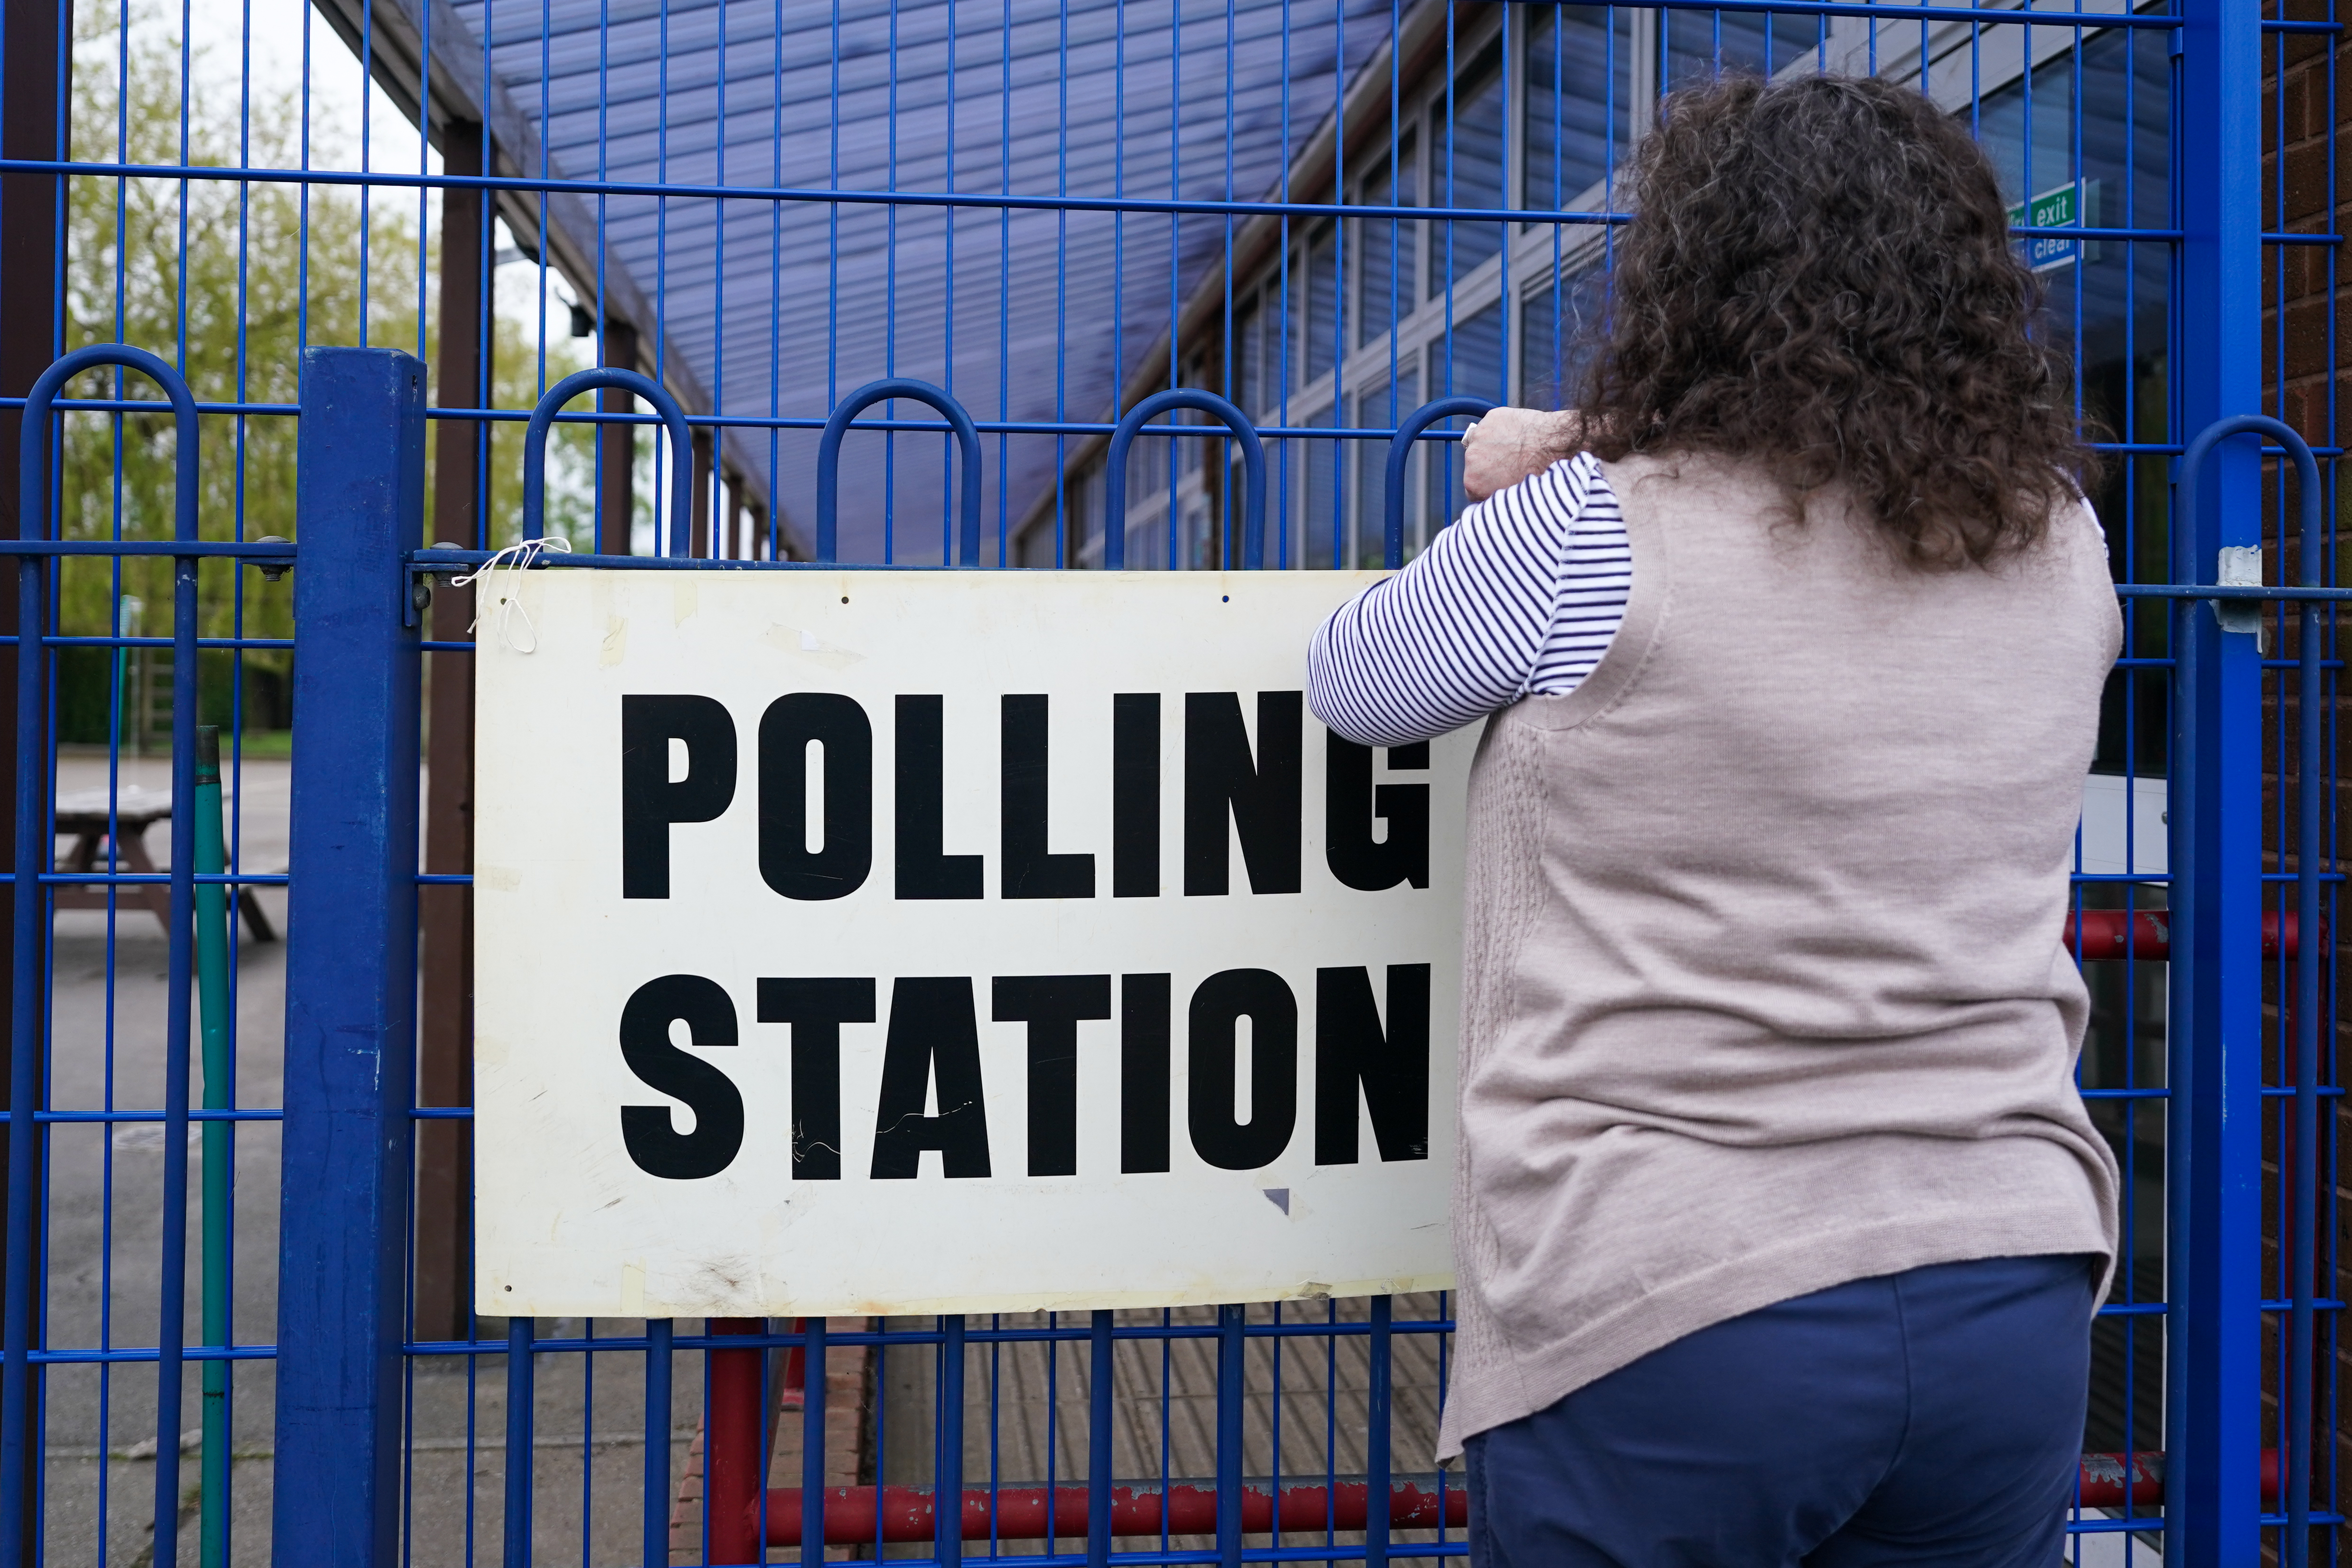 A polling station in Yarm prepares to open ahead of voting in local elections